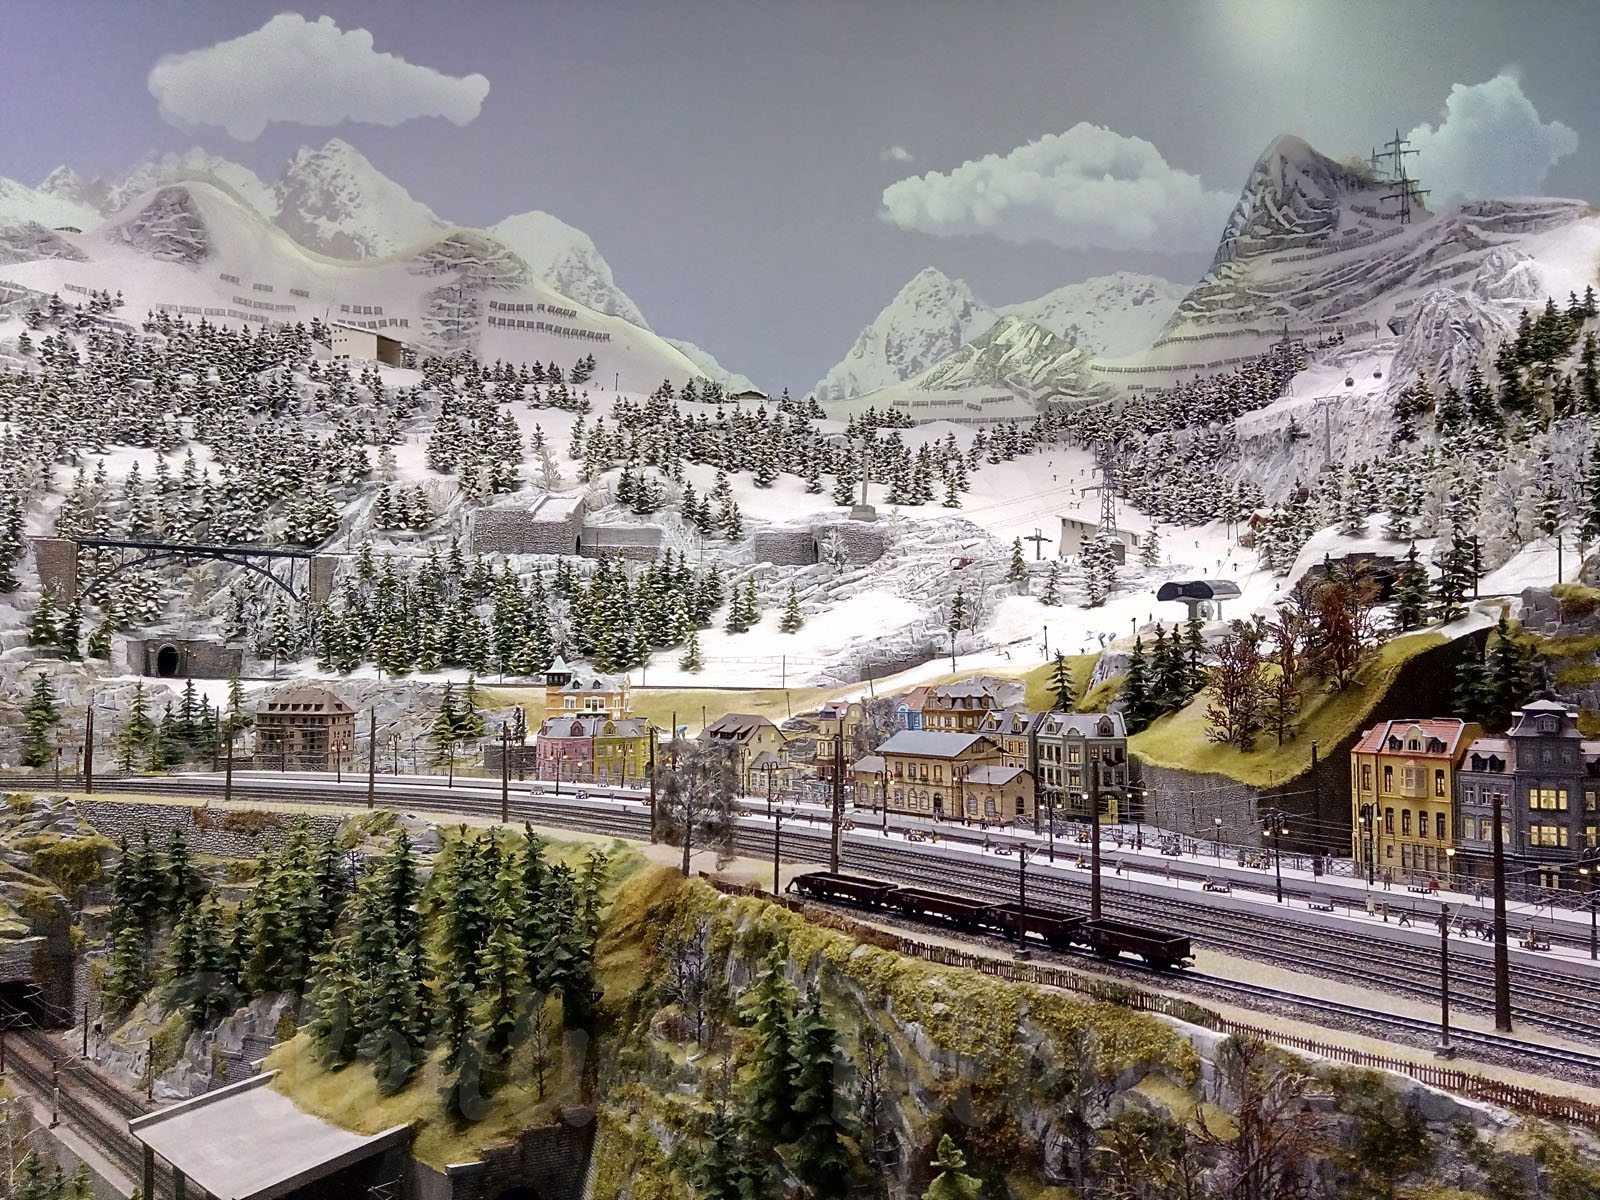 Porsche Model Railroad Museum with Model trains in HO Scale